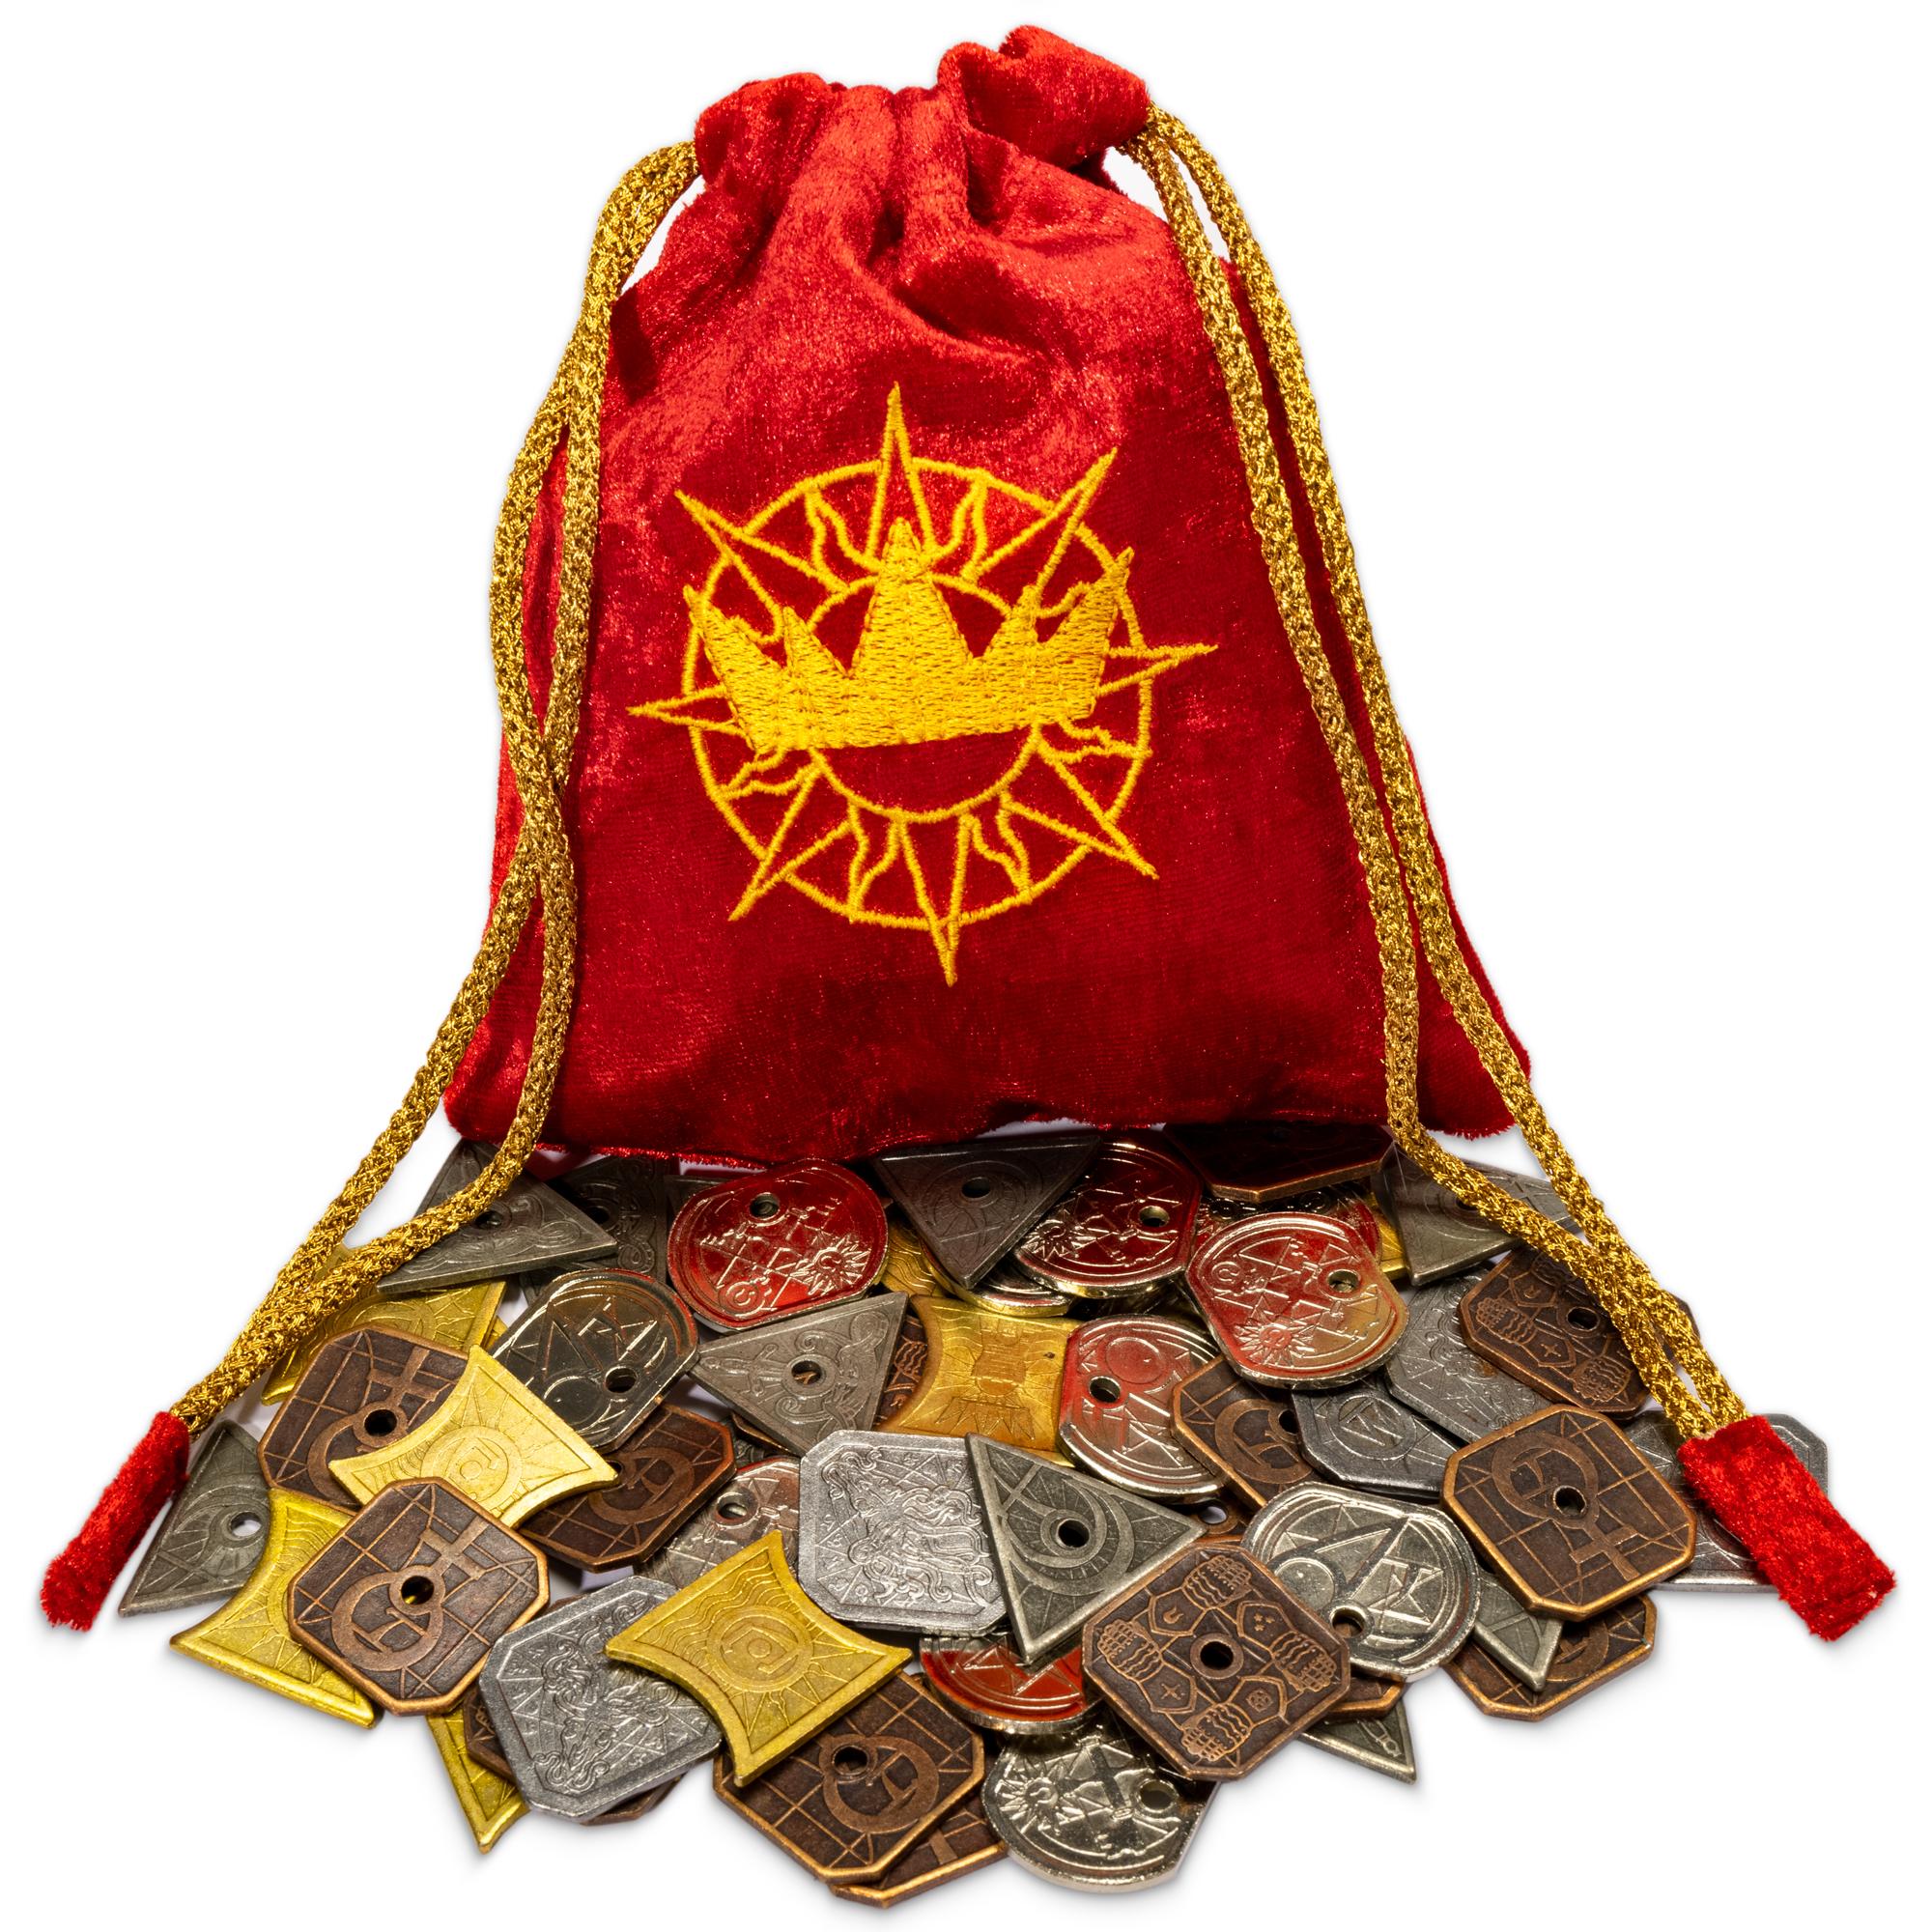 The King's Coffers Fantasy Coins